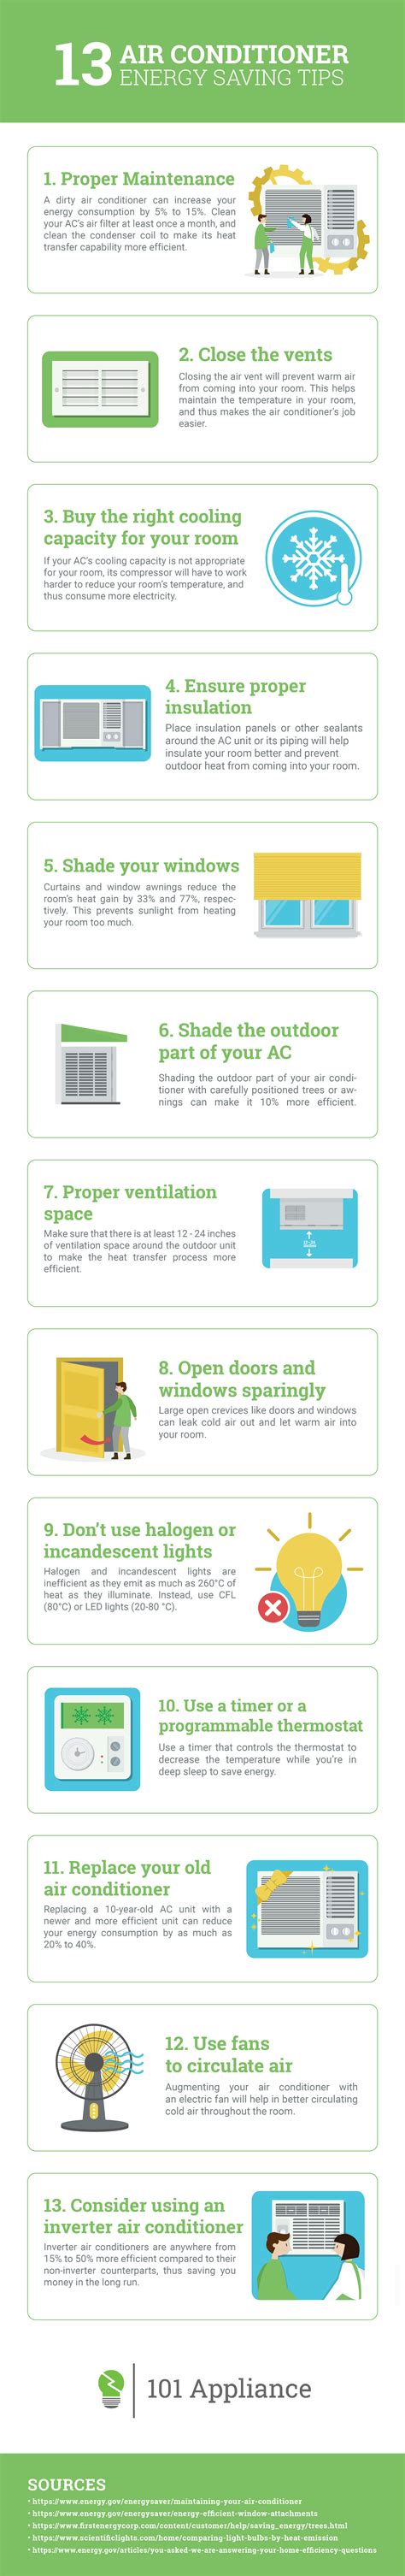 13 Air Conditioner Energy Saving Tips Infographic 101appliance